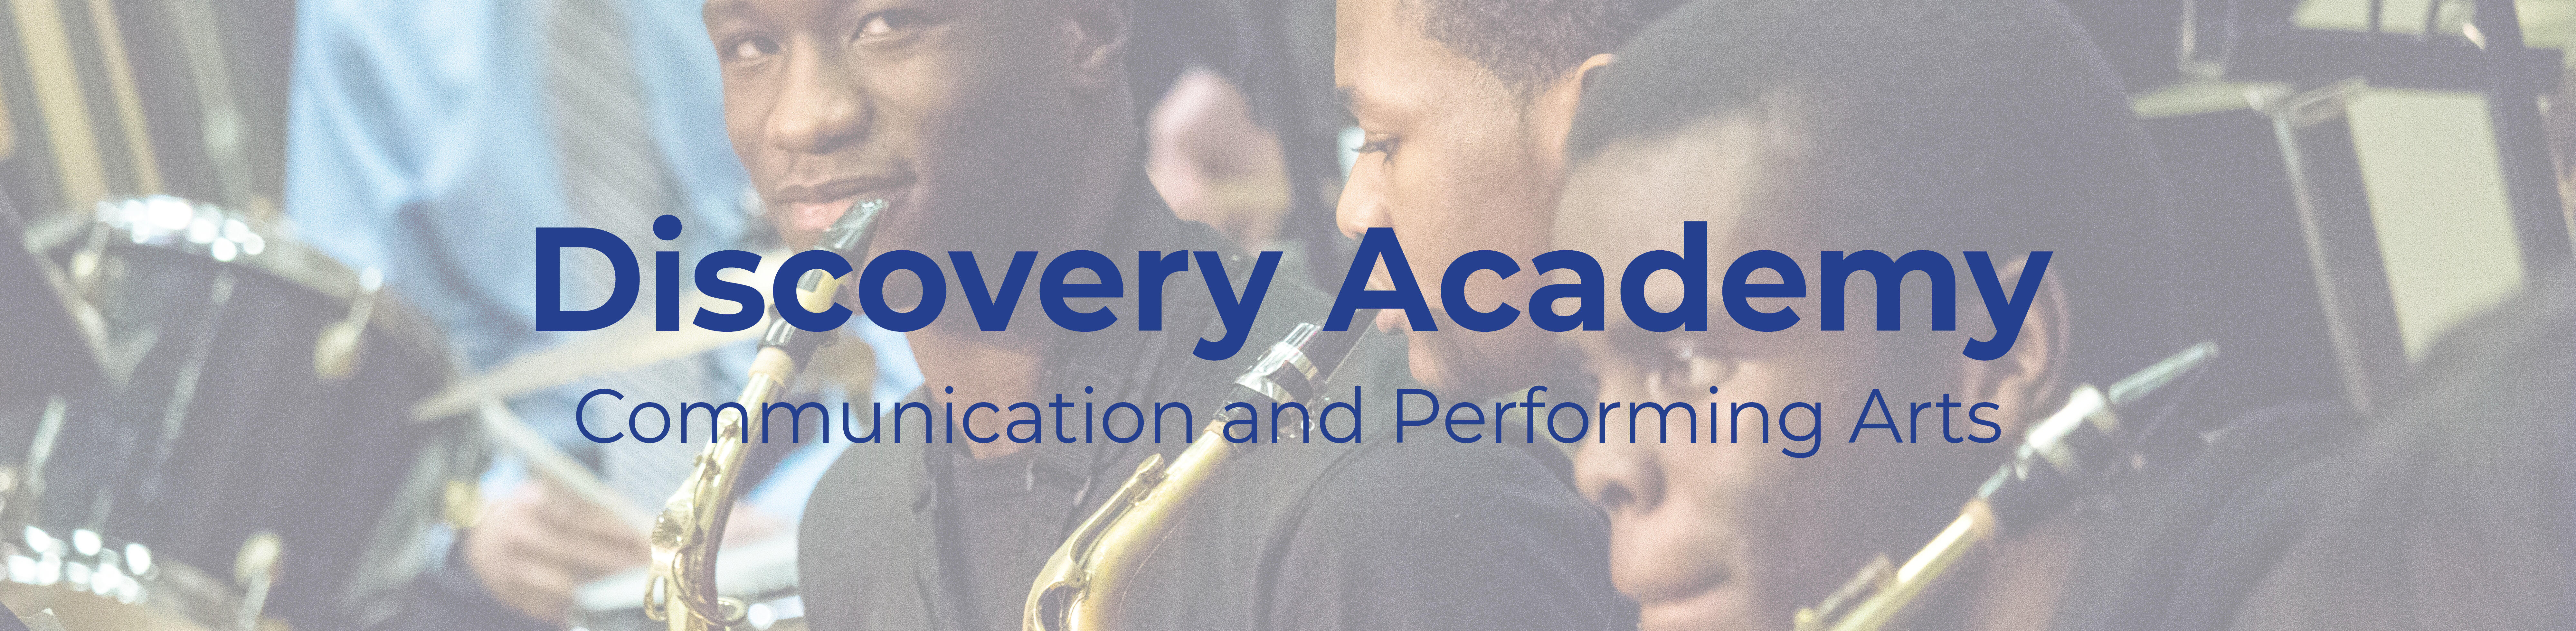 Text that reads "Discovery Academy" overlaid on a picture of a students playing instruments